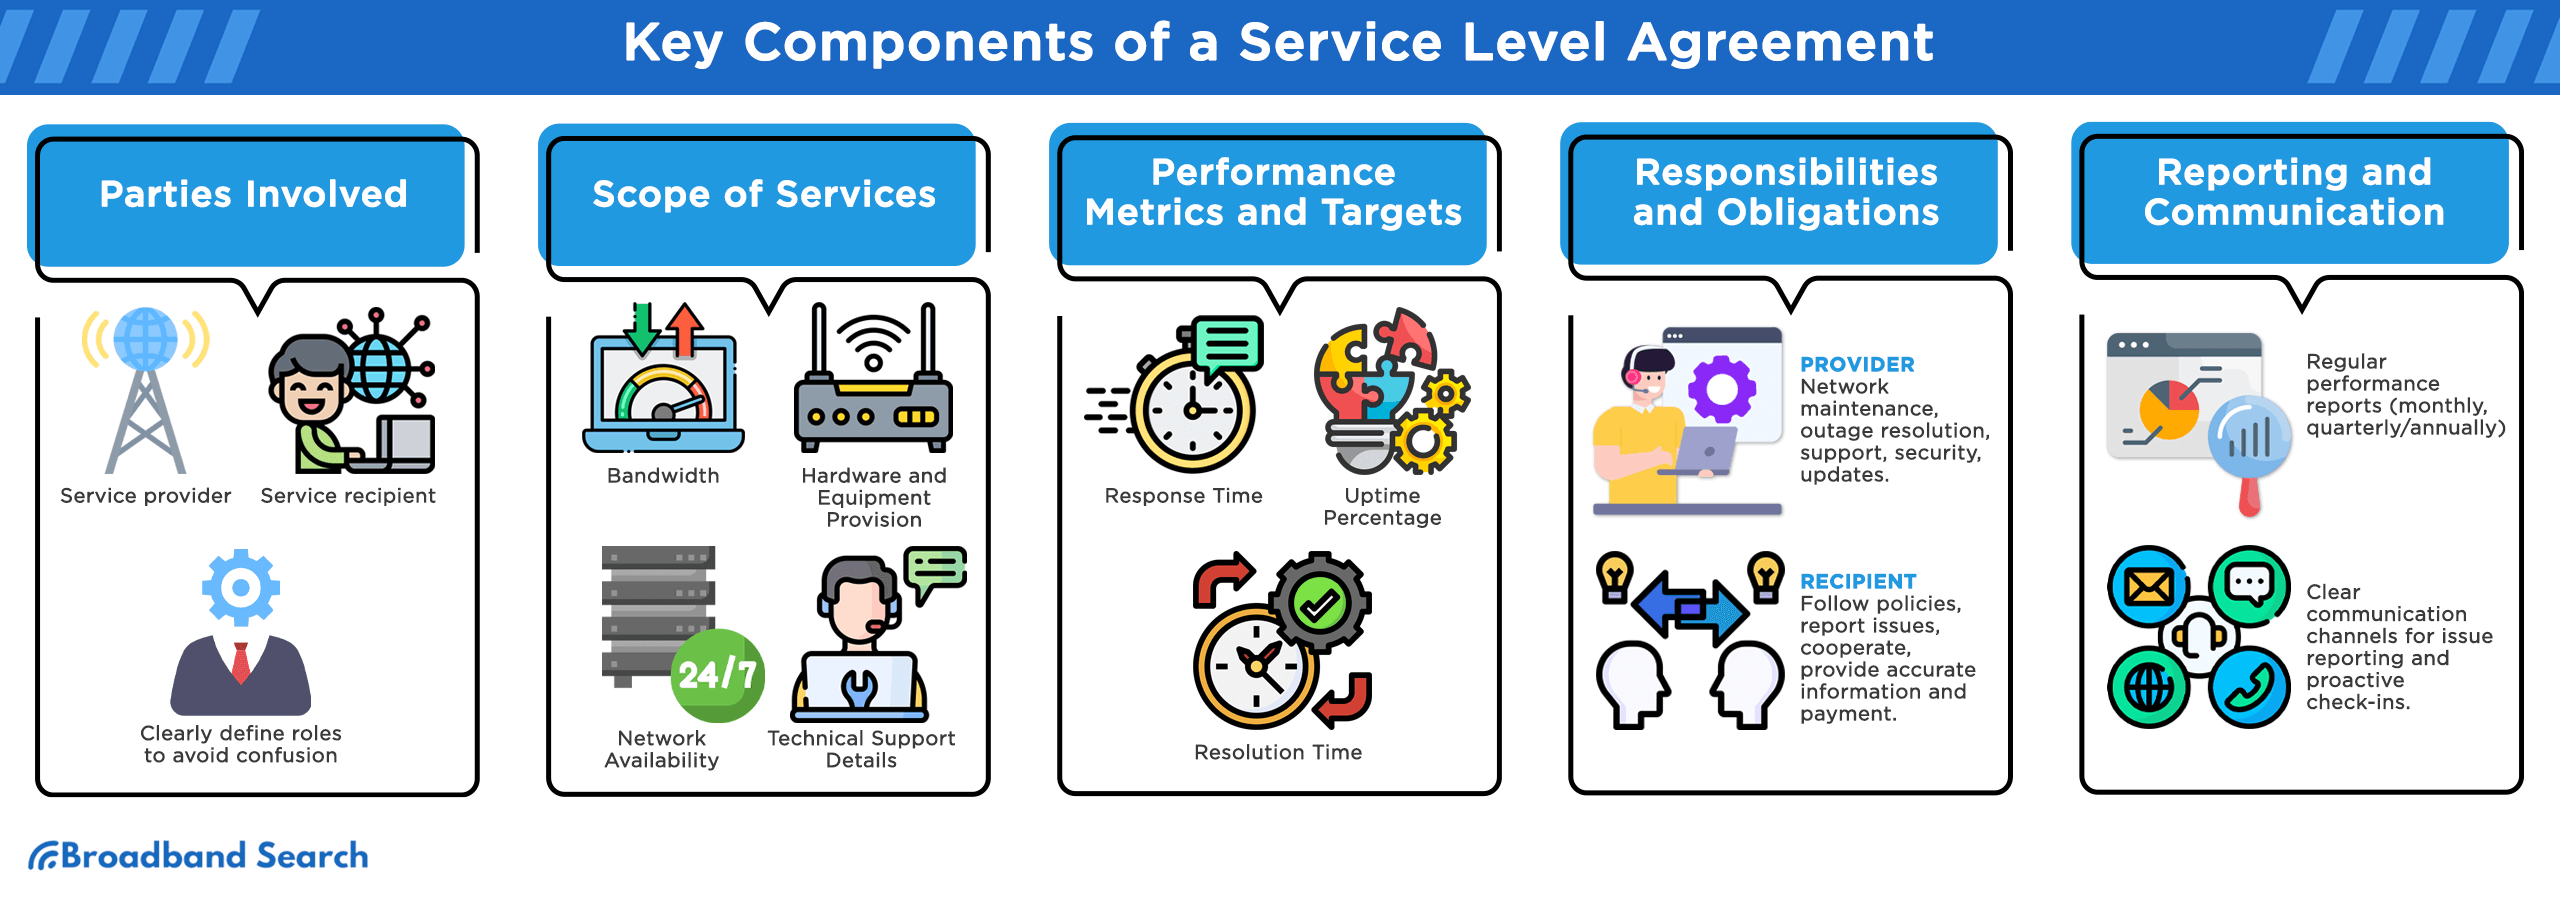 Key components of a service level agreement